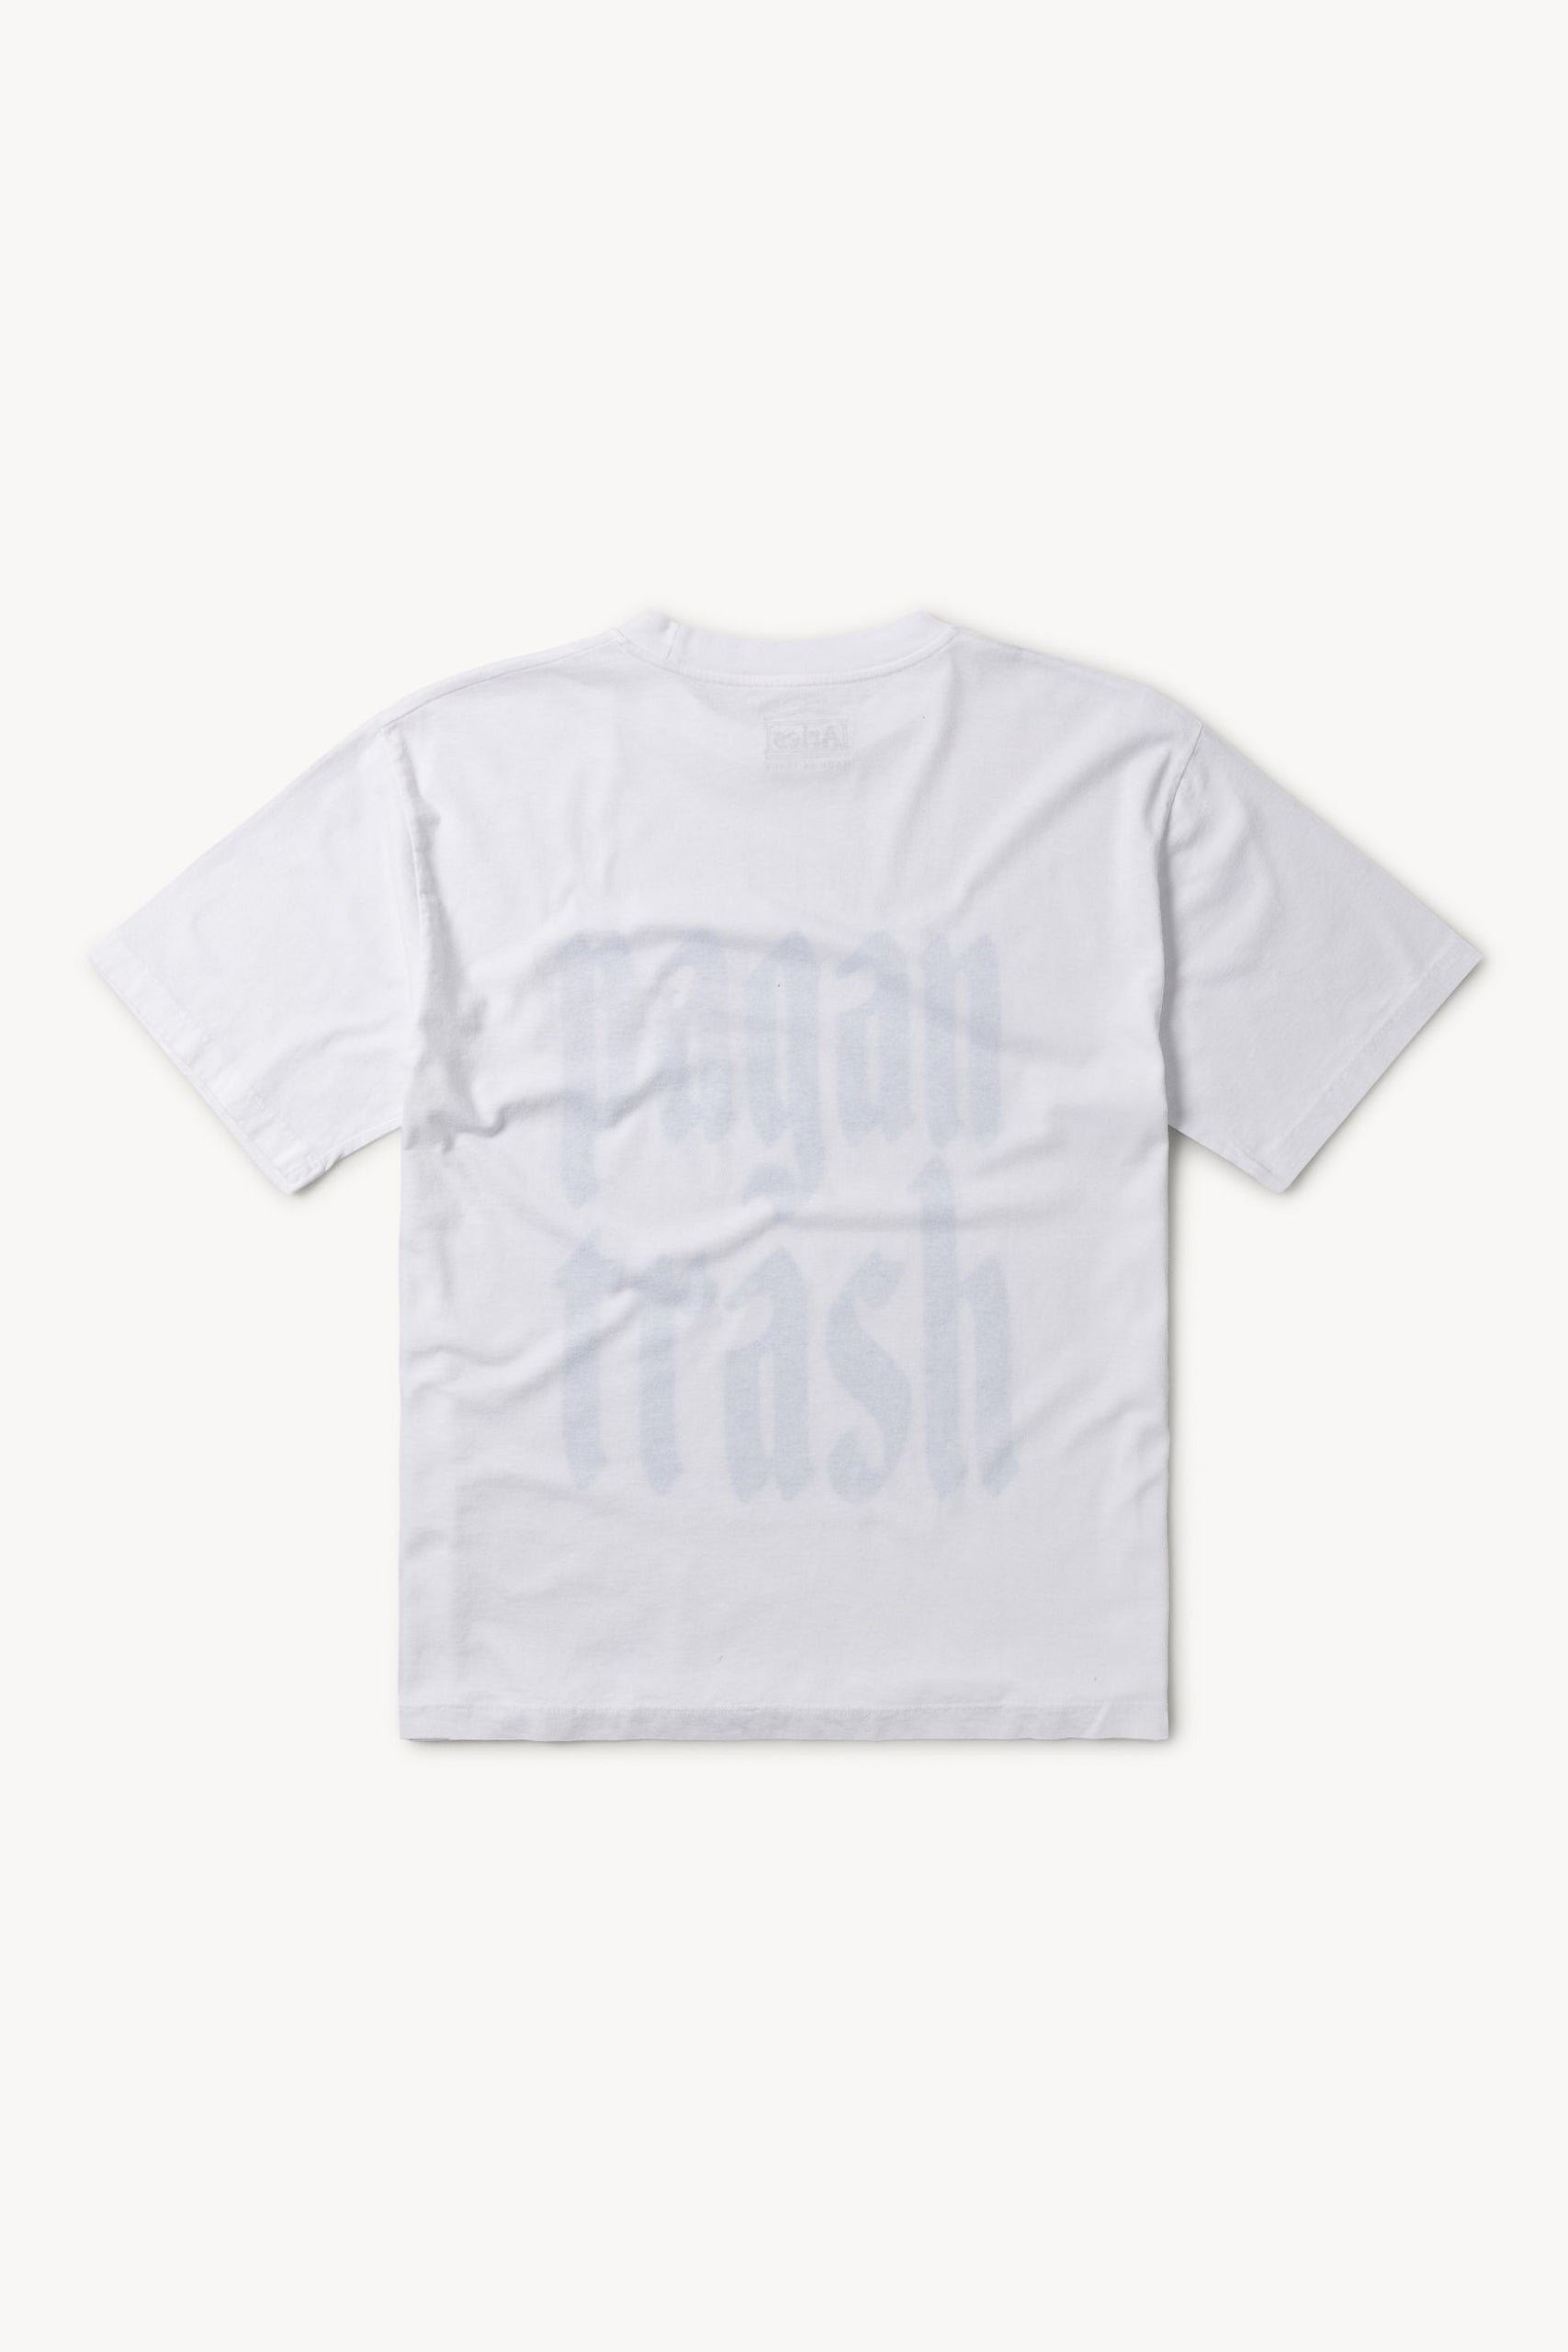 Load image into Gallery viewer, Pagan Trash Reverse SS Tee